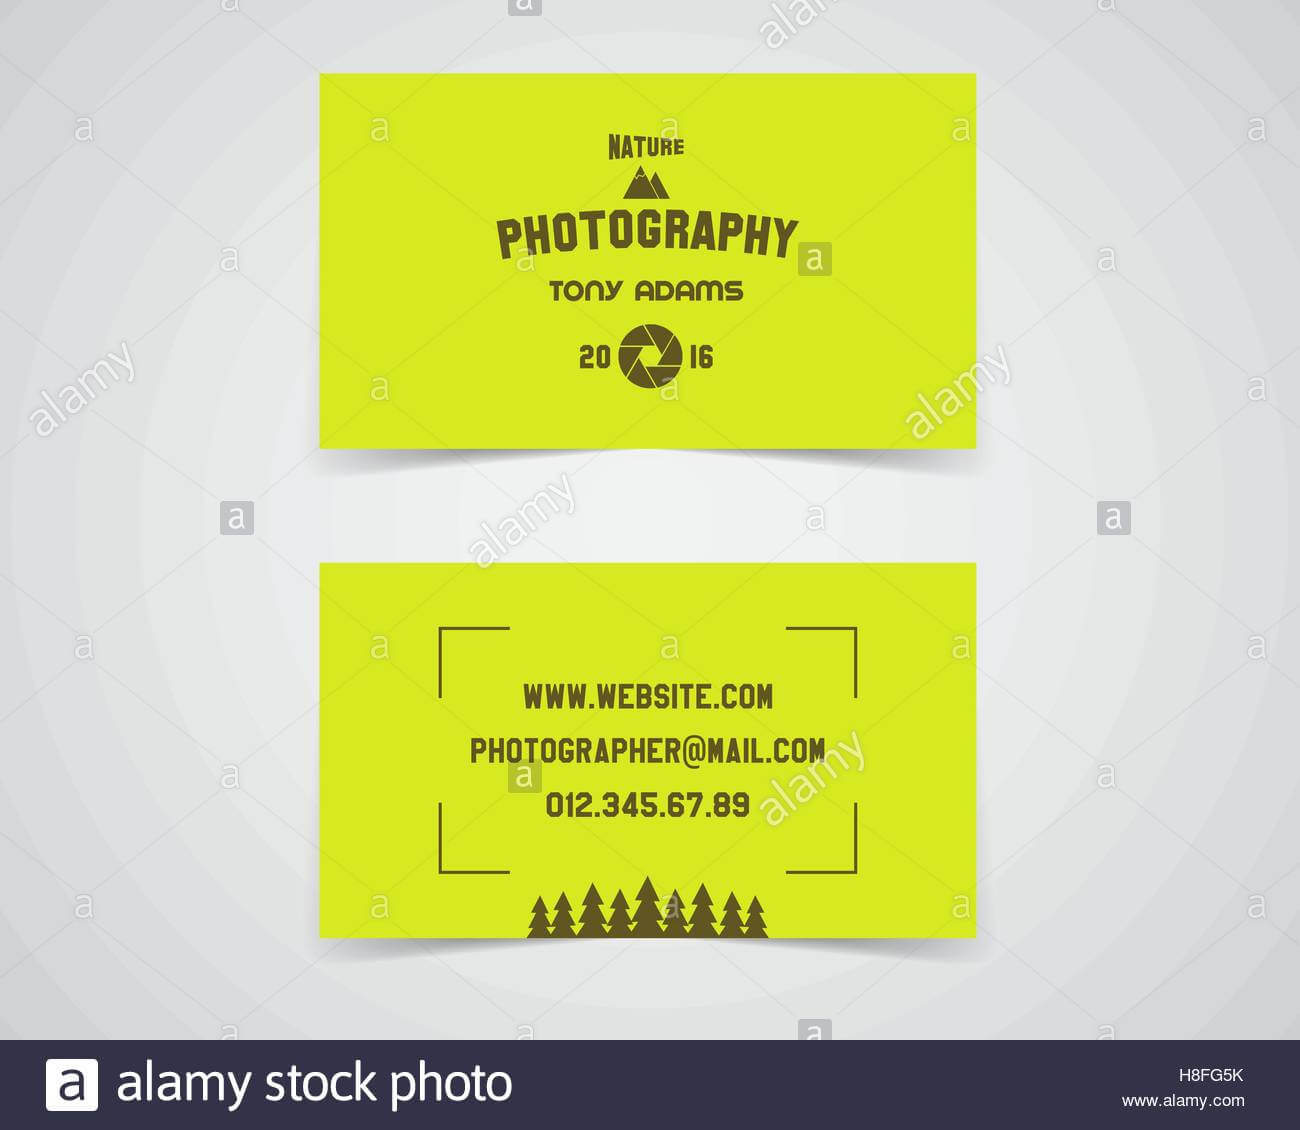 Modern Light Business Card Template For Nature Photography With Regard To Photographer Id Card Template